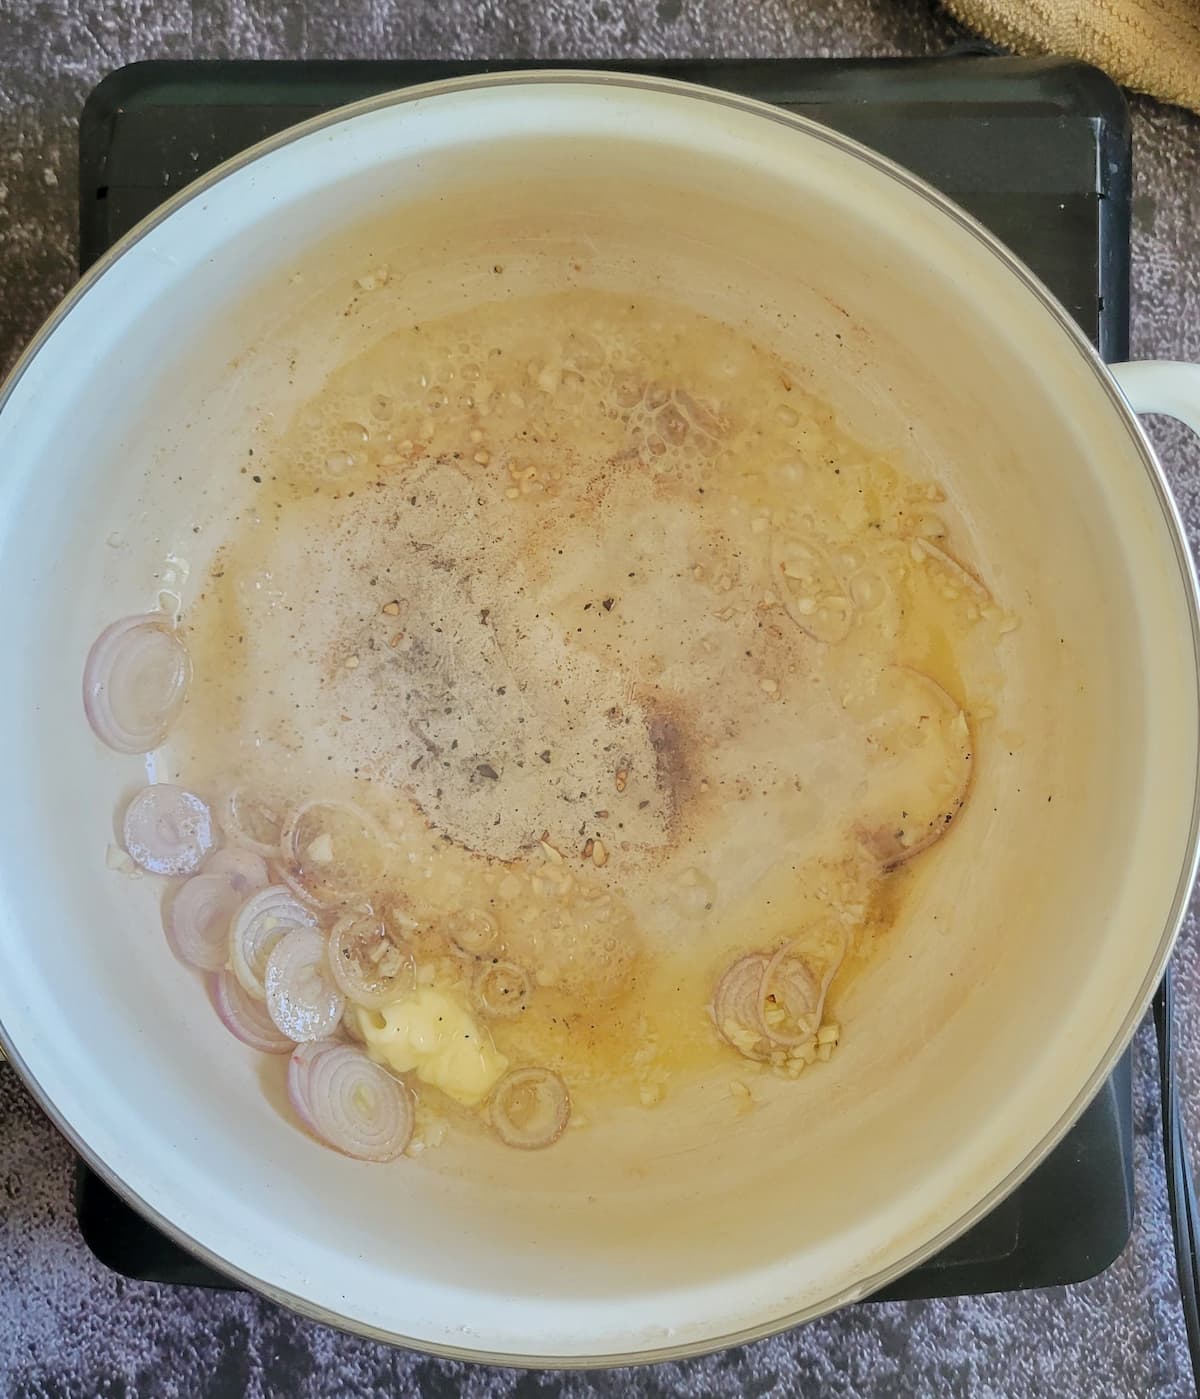 shallots and garlic cooking in butter in a pot on a burner